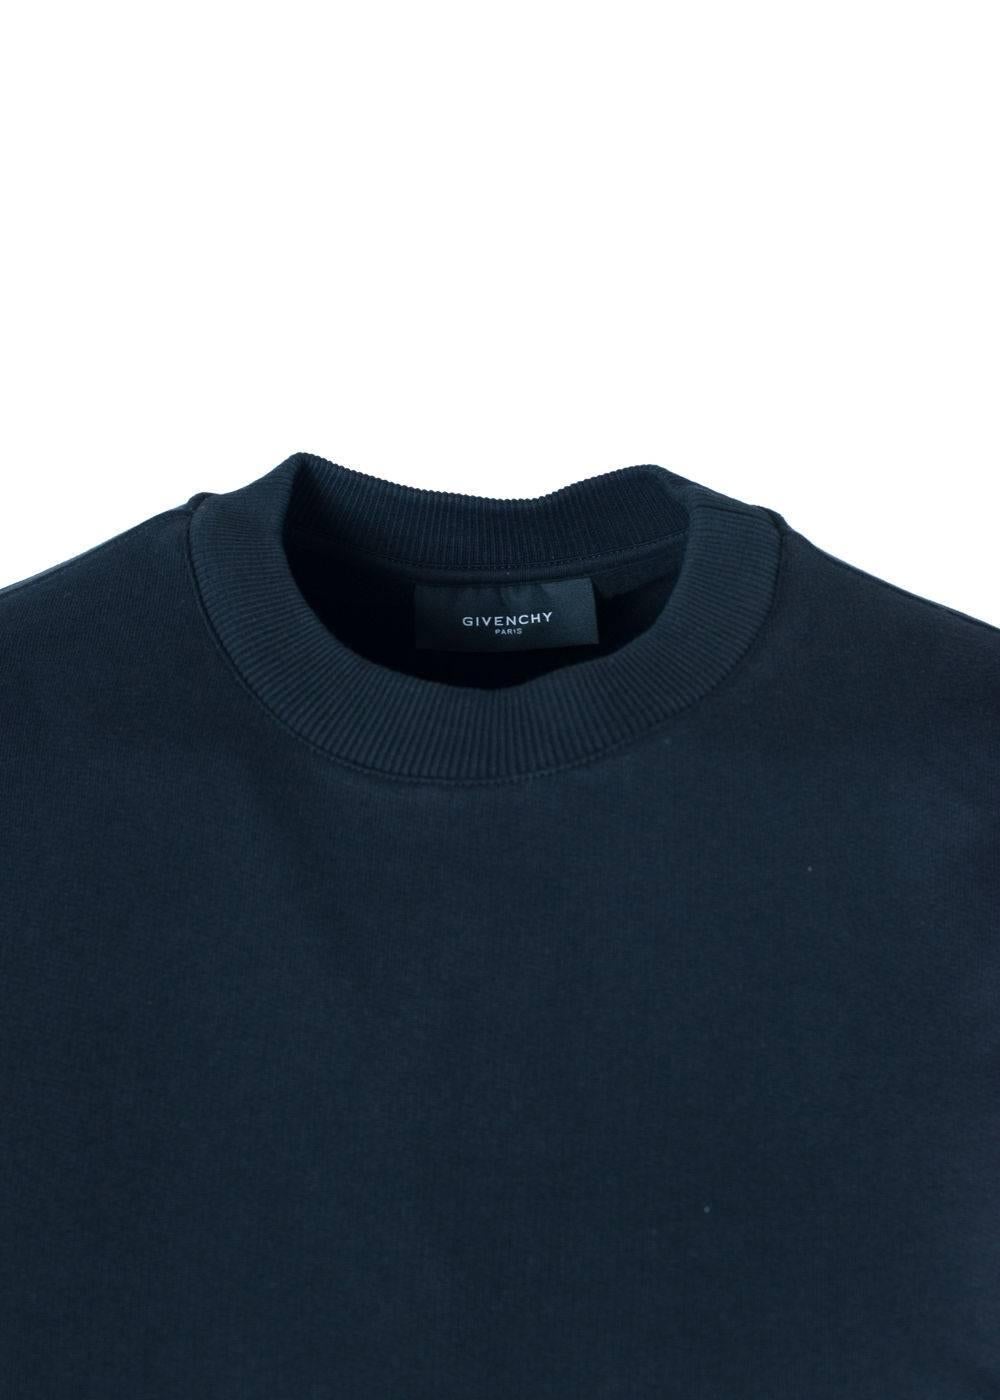 Brand New Givenchy Men's Sweatshirt
Original Tag
Retails in Stores & Online for $695
Men's Size M Fits True to Size

Givenchy's simplistic and minimalistic sweatshirt in a solid black tone with a rectangular graphic print on the back of top. Made